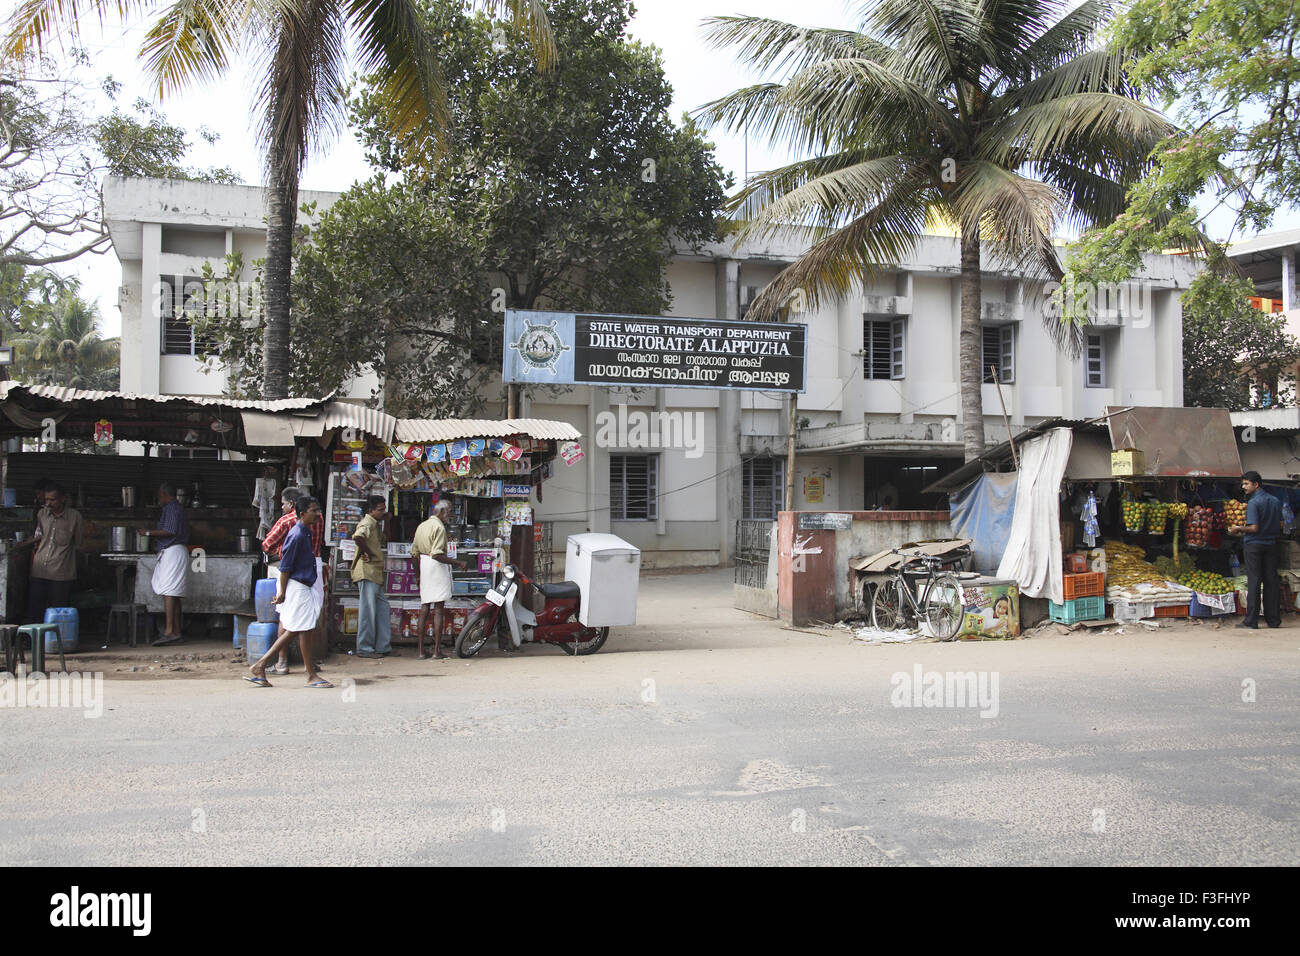 Small shops on road and building of State Water Transport Department ; directorate ; Alappuzha Alleppey ; Kerala Stock Photo